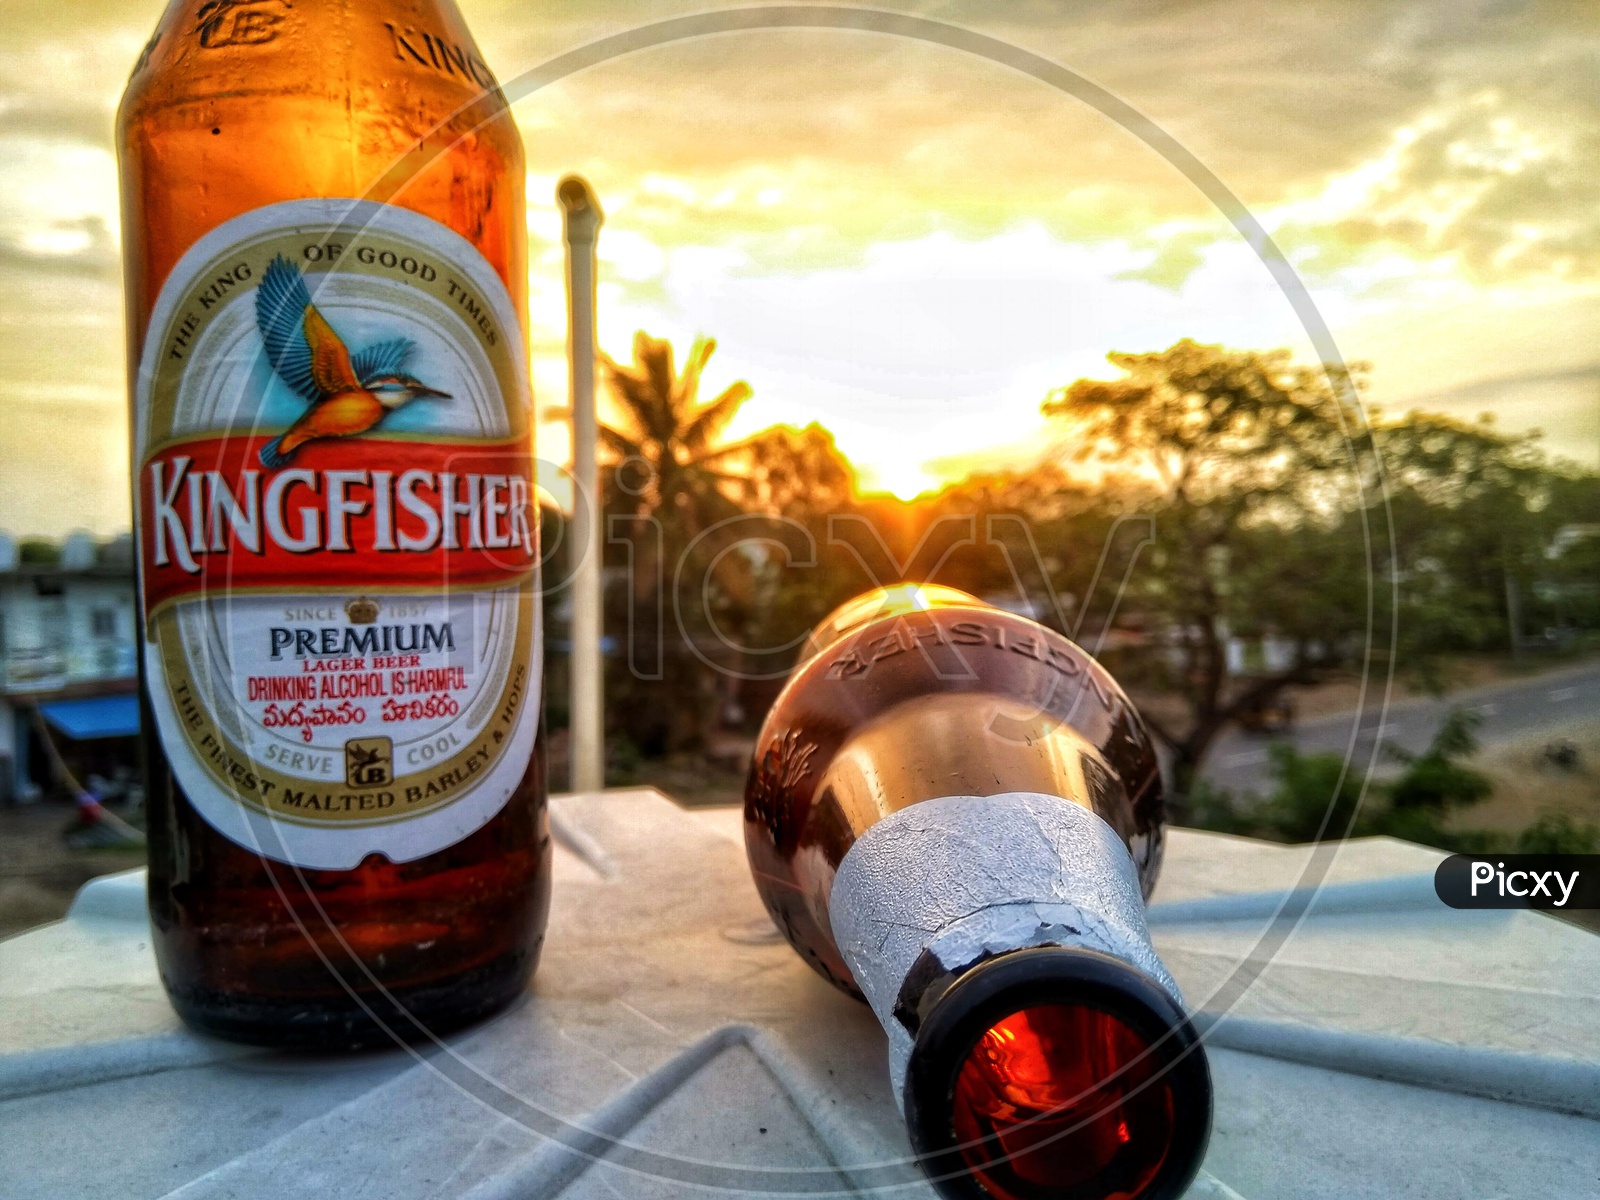 I've only been in love with a beer bottle and sunset